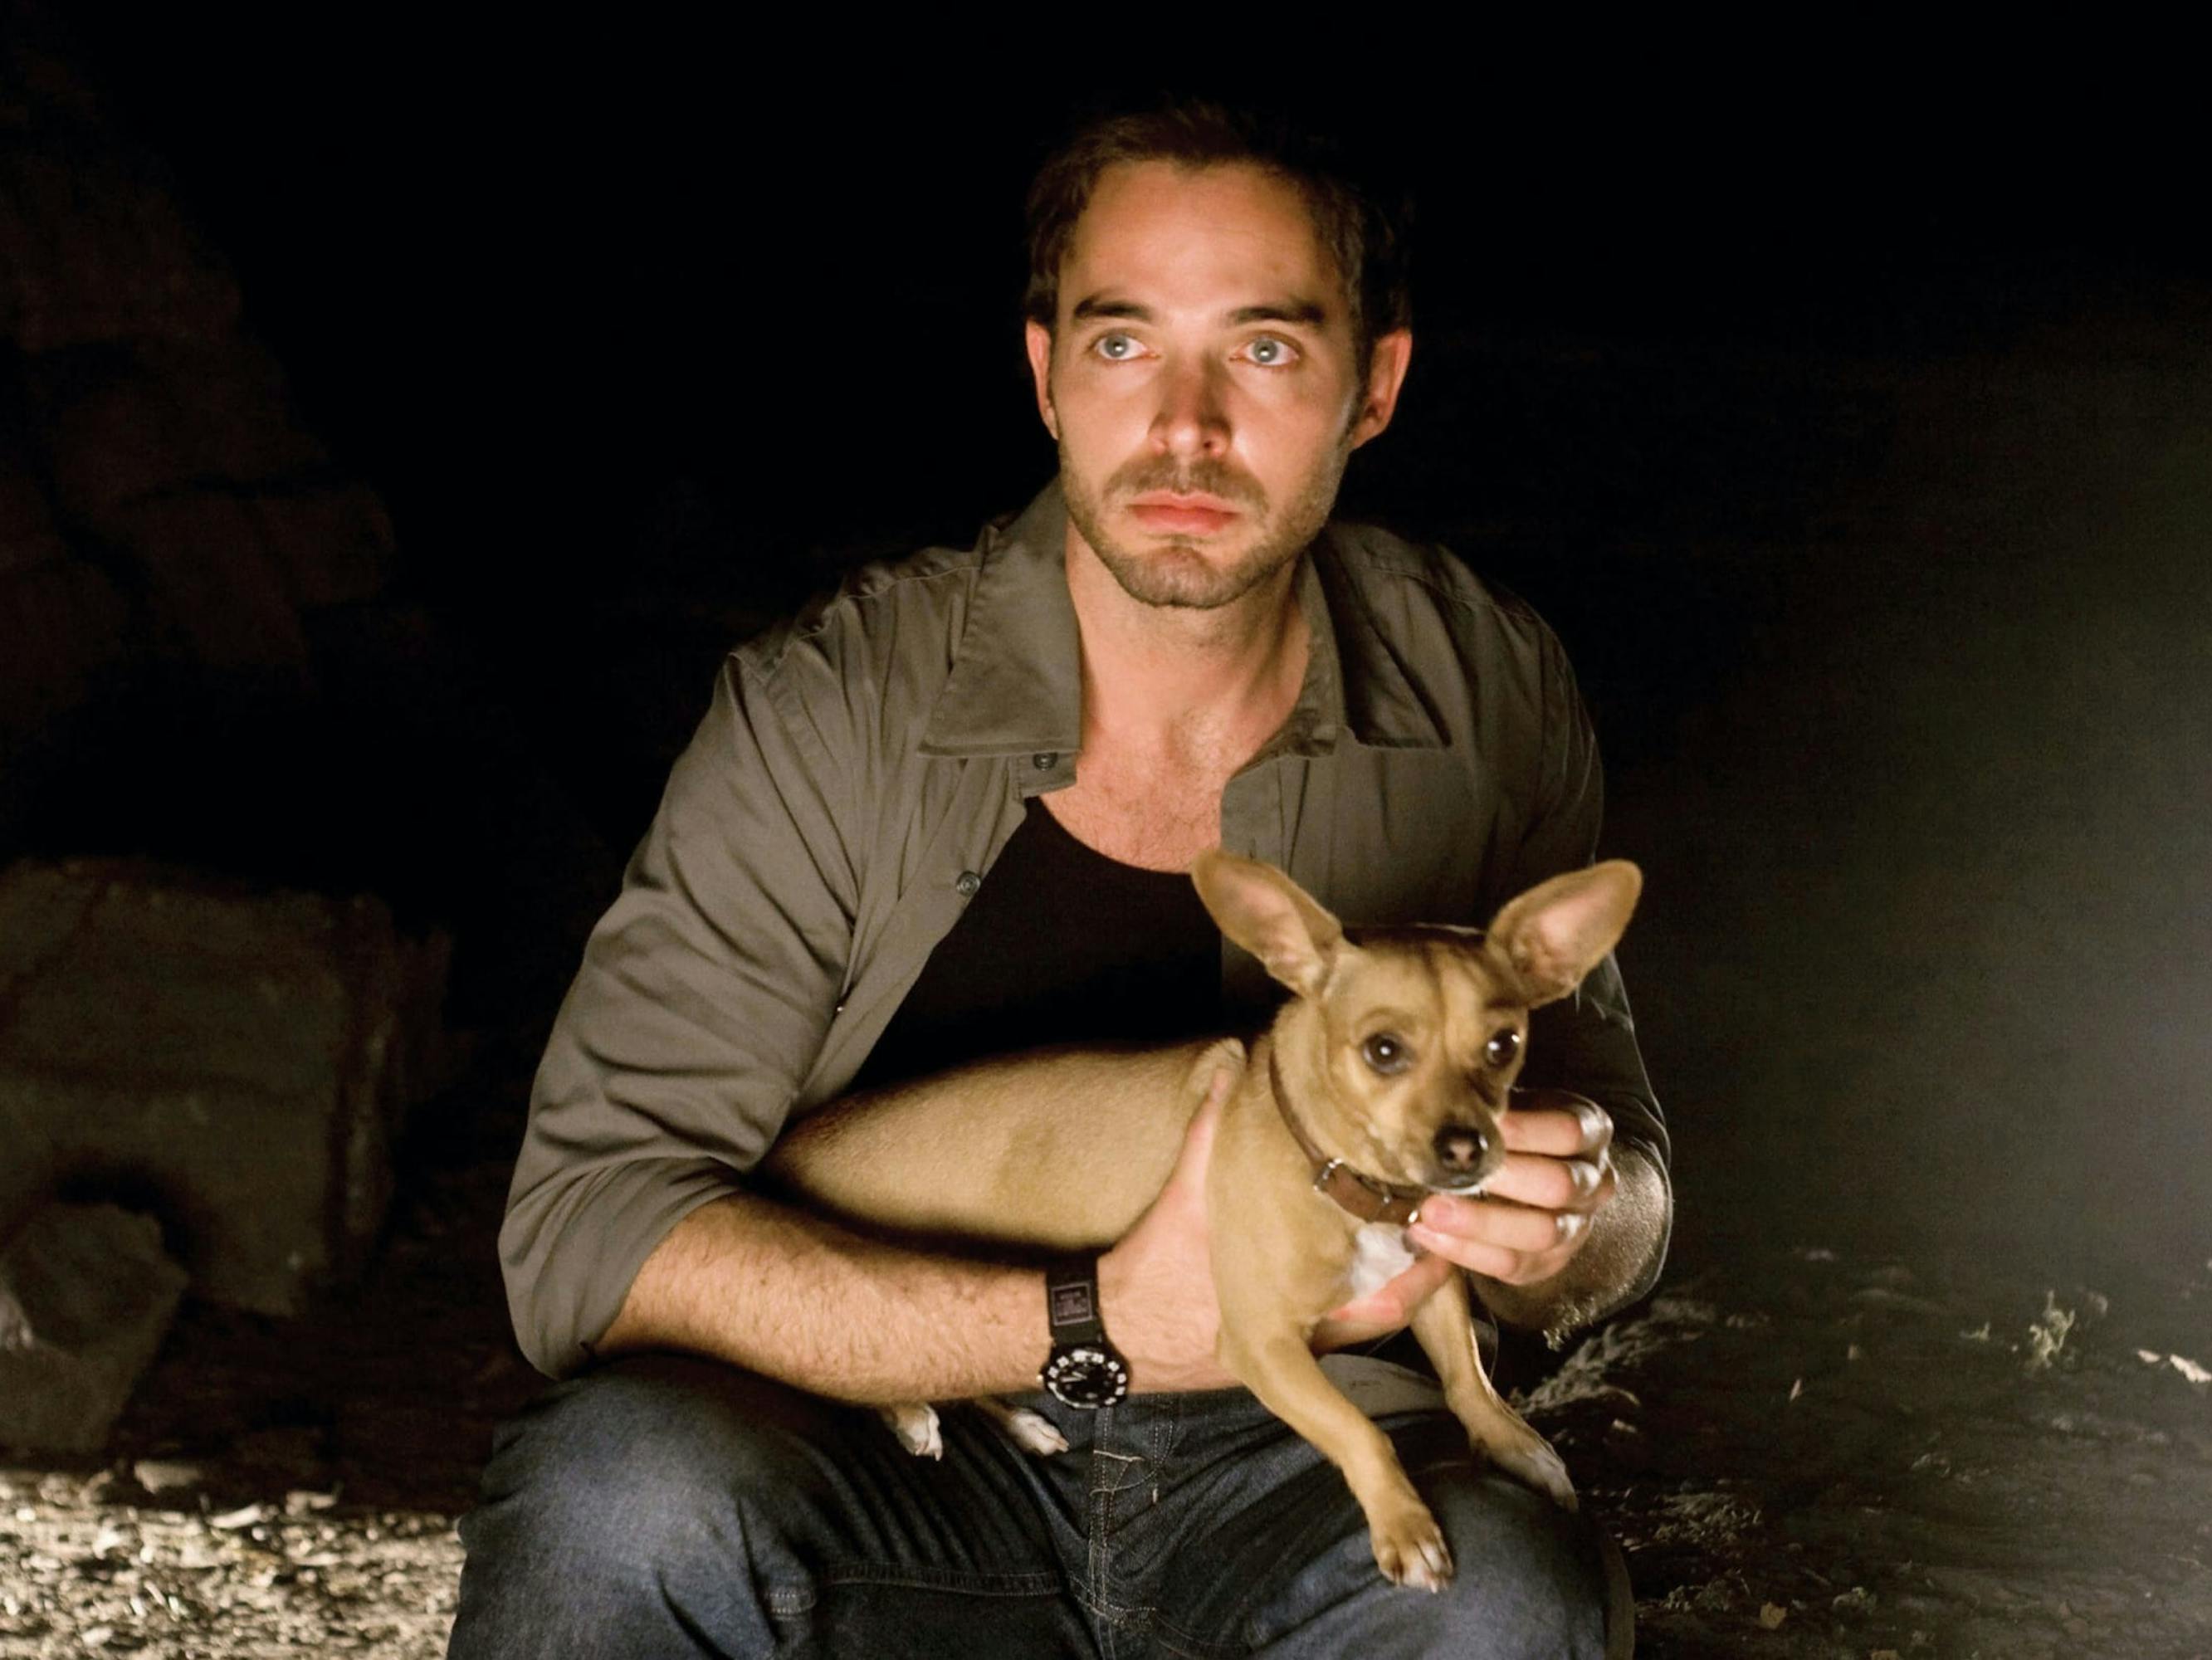 Álex (Manolo Cardona) holds a light brown chihuahua in his arms. The scene is dark, but his figure is illuminated. He wears a green long sleeved shirt and jeans and looks intensely at something off screen.